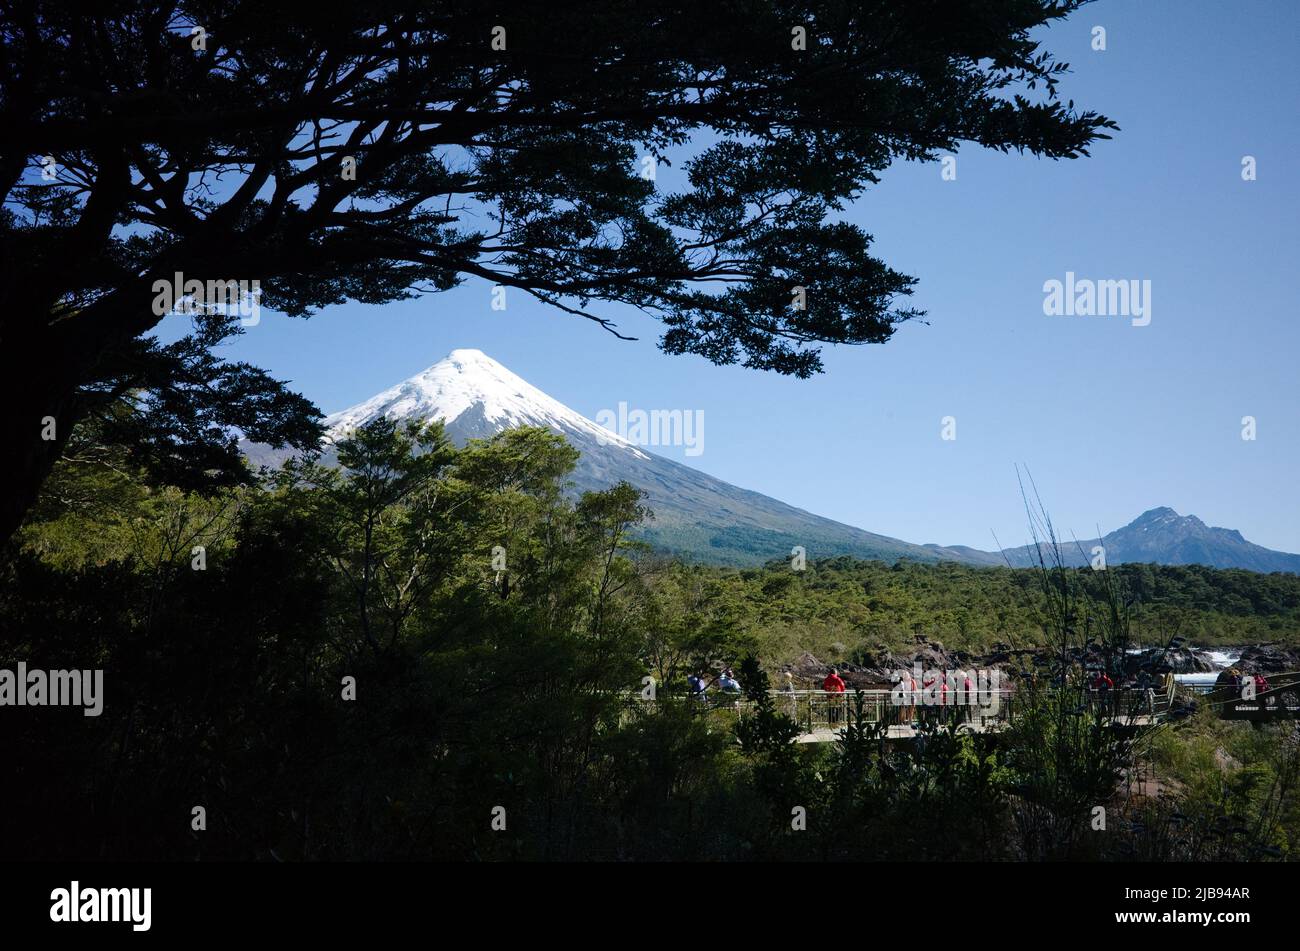 Puerto Varas, Chile - February, 2020: View of snow-covered peak of Osorno Volcano through trees branches from observation deck near Saltos de Petrohue Stock Photo